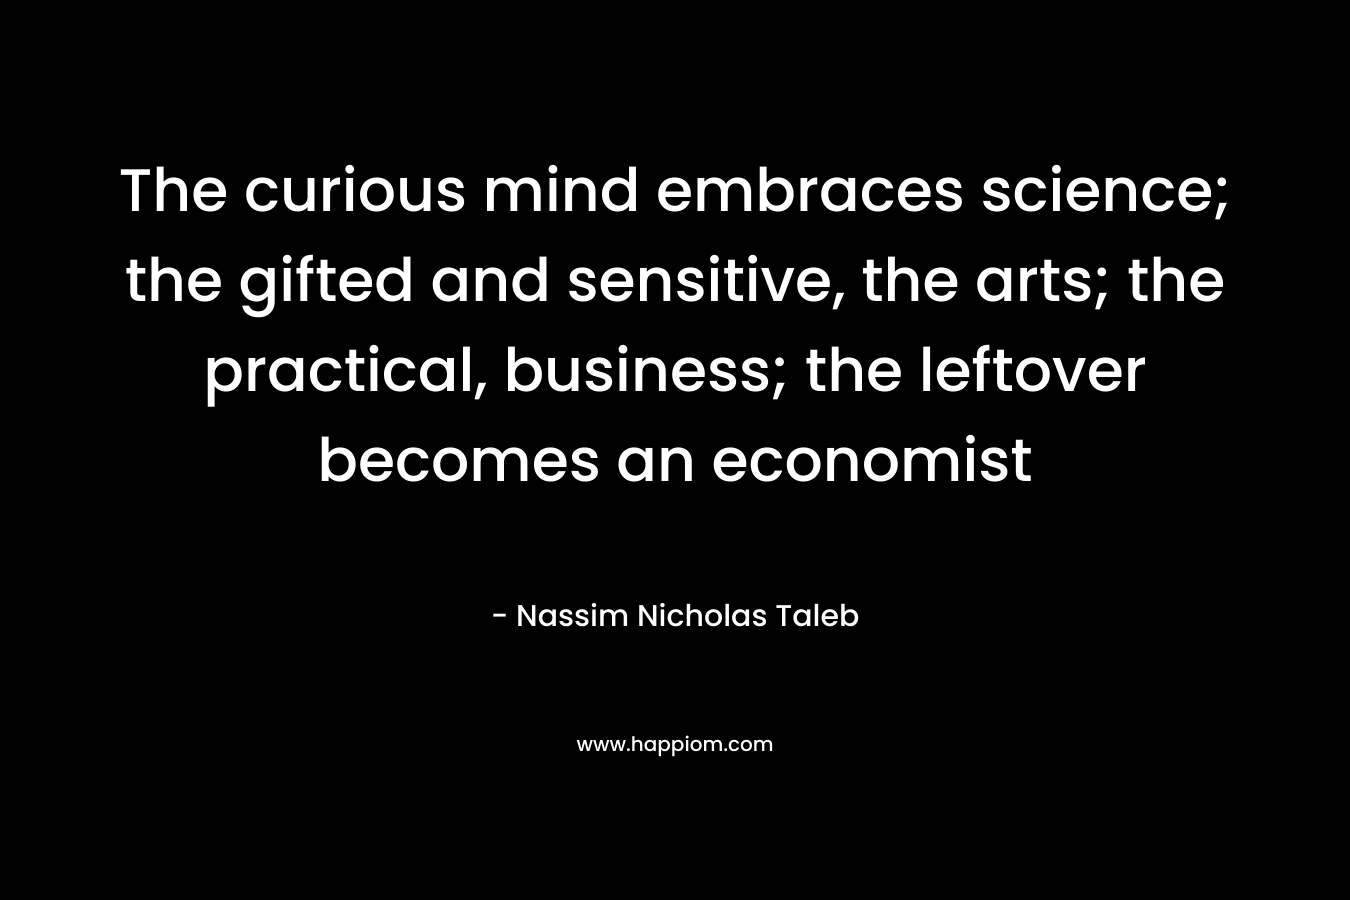 The curious mind embraces science; the gifted and sensitive, the arts; the practical, business; the leftover becomes an economist